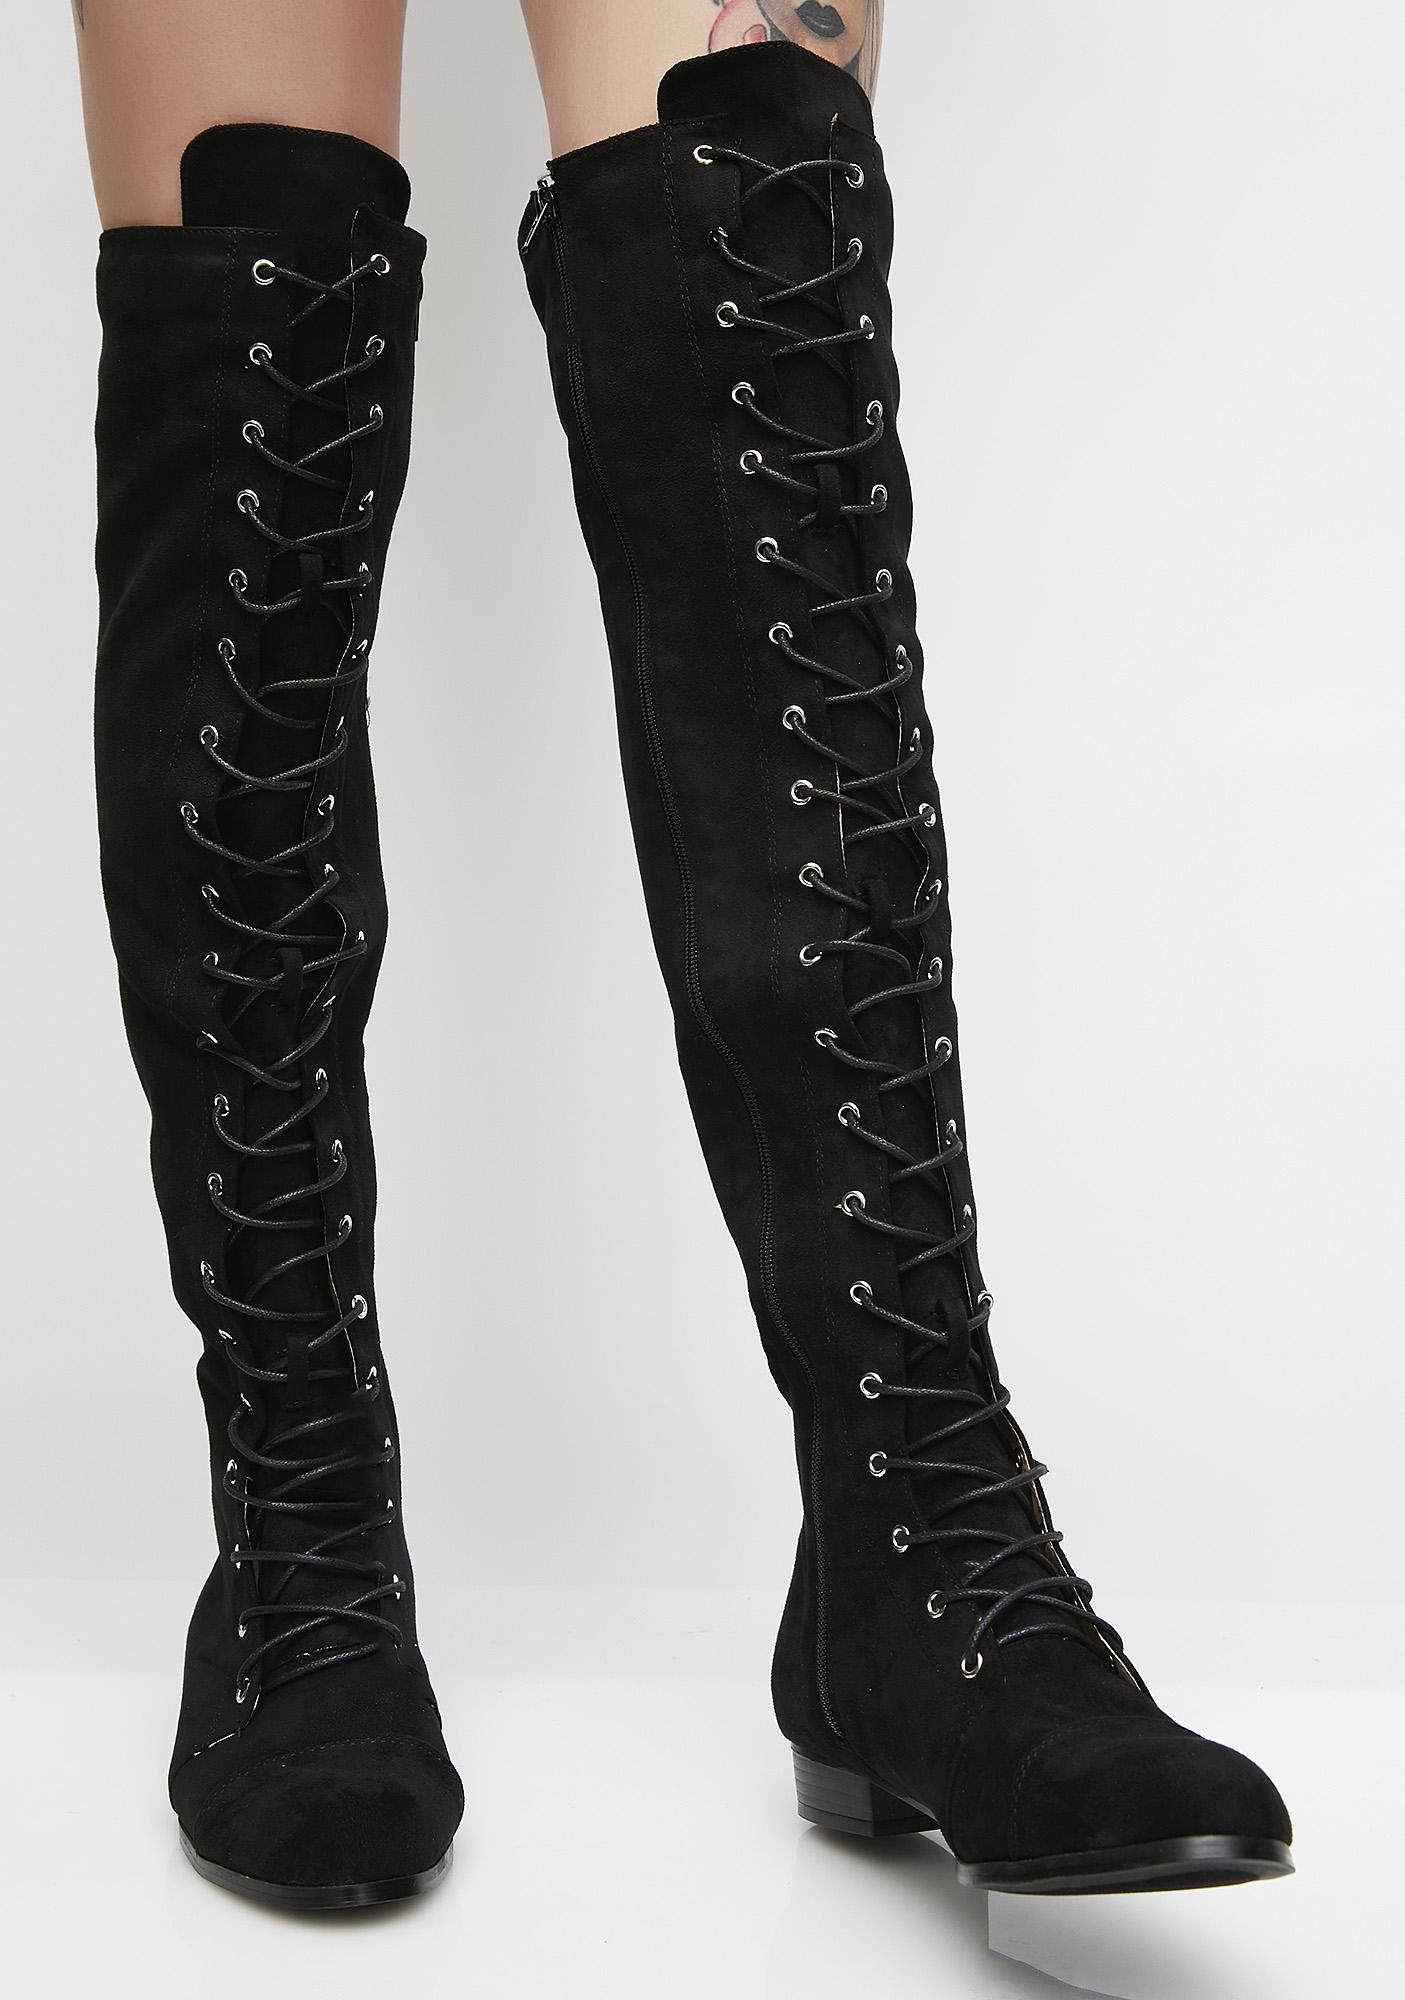 Details about   Womens Patent Leather High Heel Platform Back Lace Up Over Knee High Thigh Boots